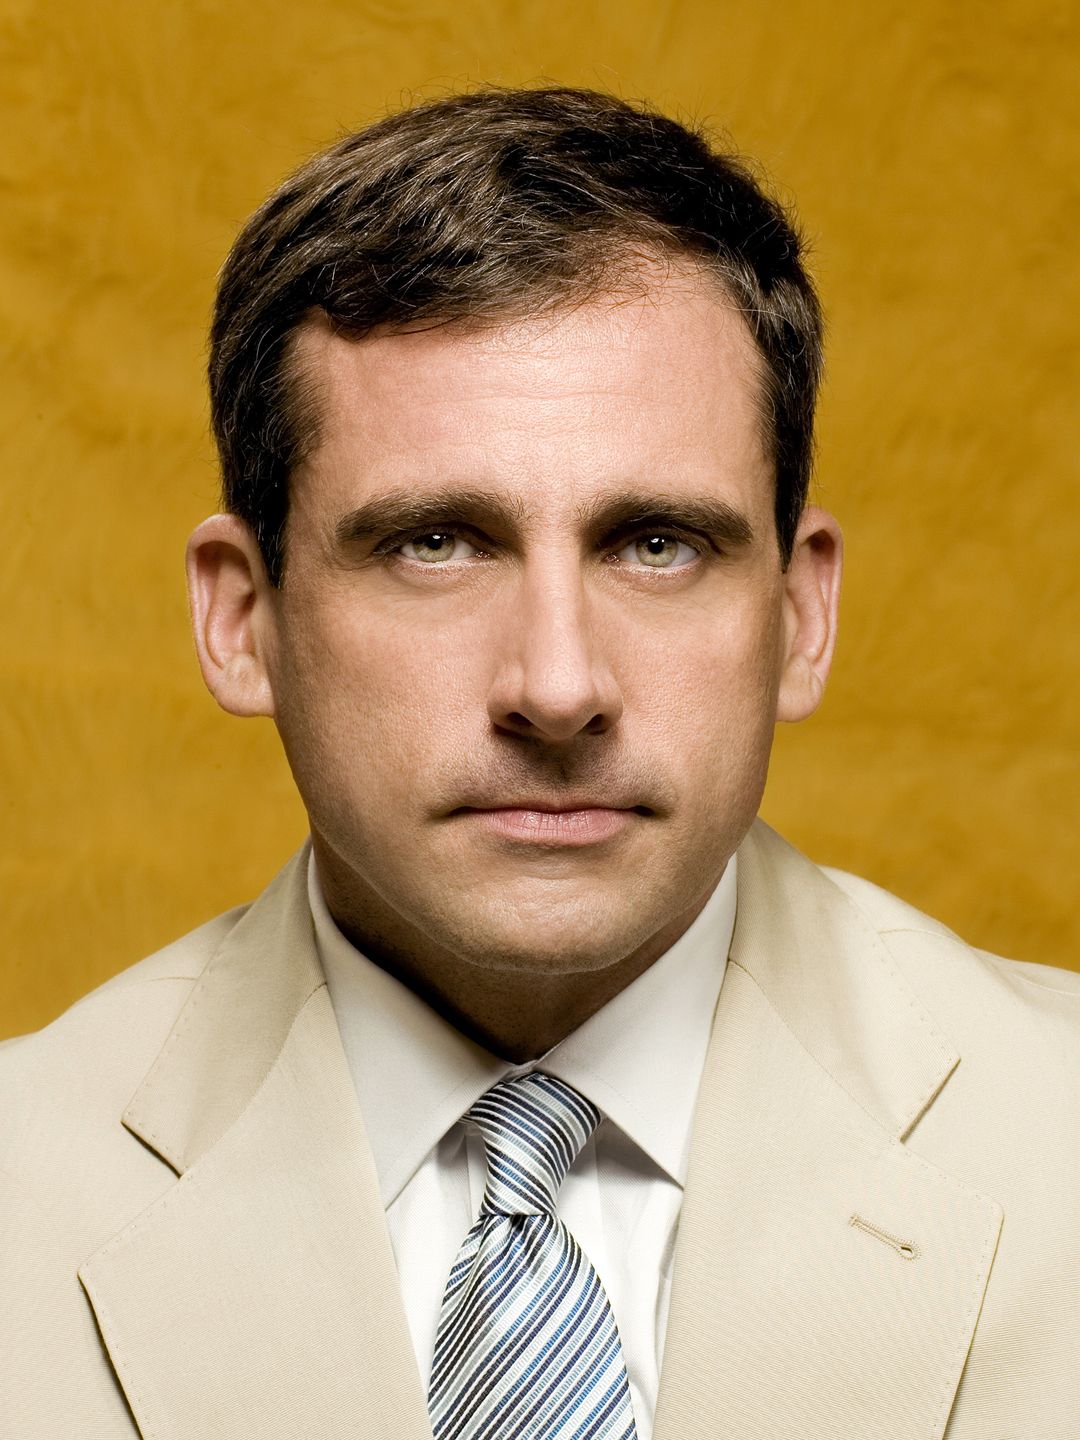 Steve Carell how old is he